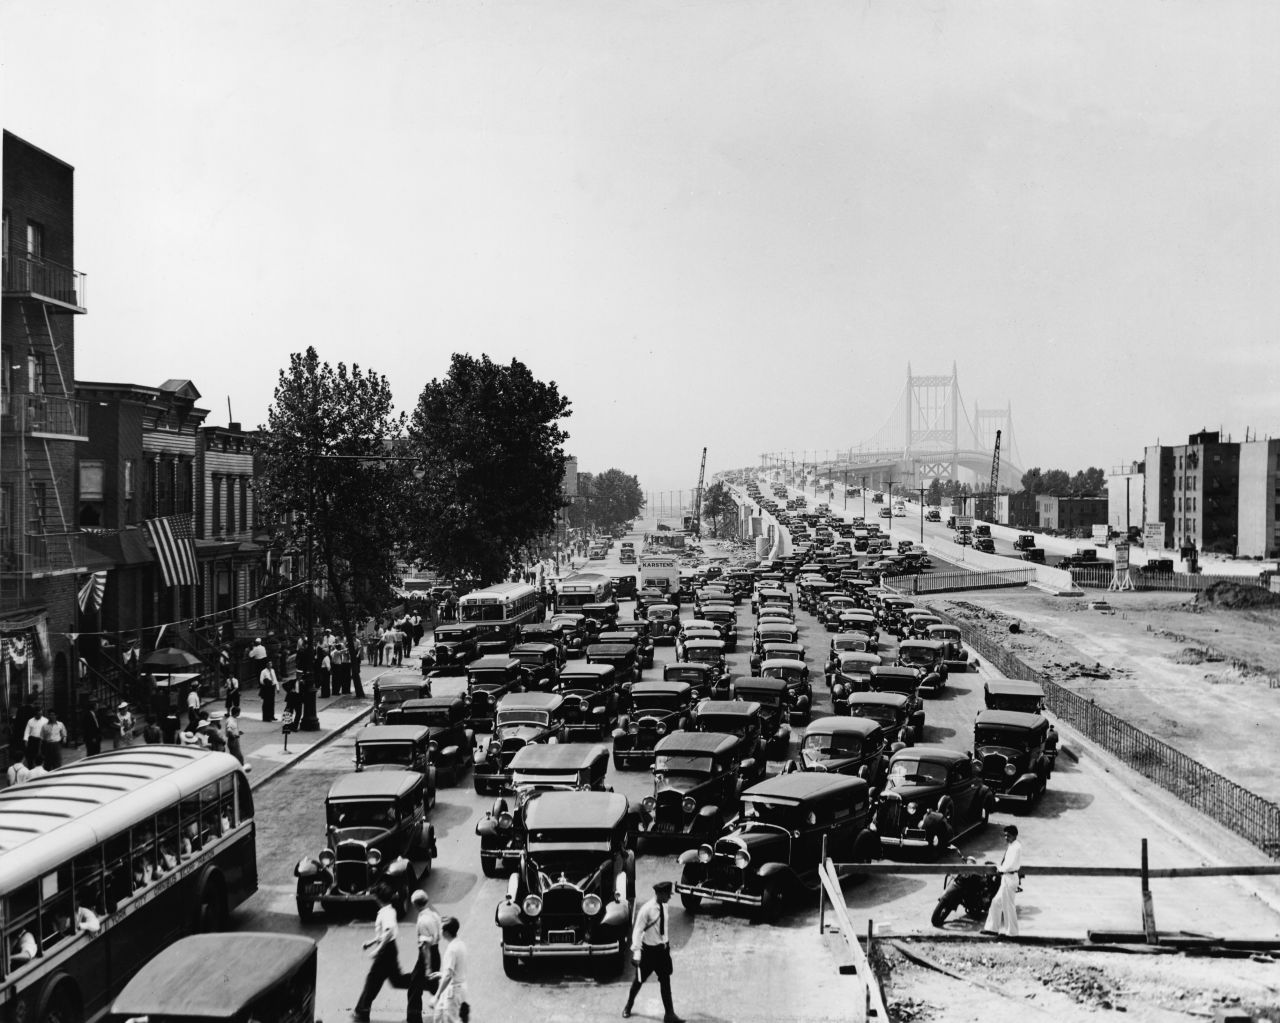 The Triborough Bridge linking Manhattan, Bronx and Queens opens in New York City on July 11, 1936. Pictured here are cars exiting the bridge in Harlem.